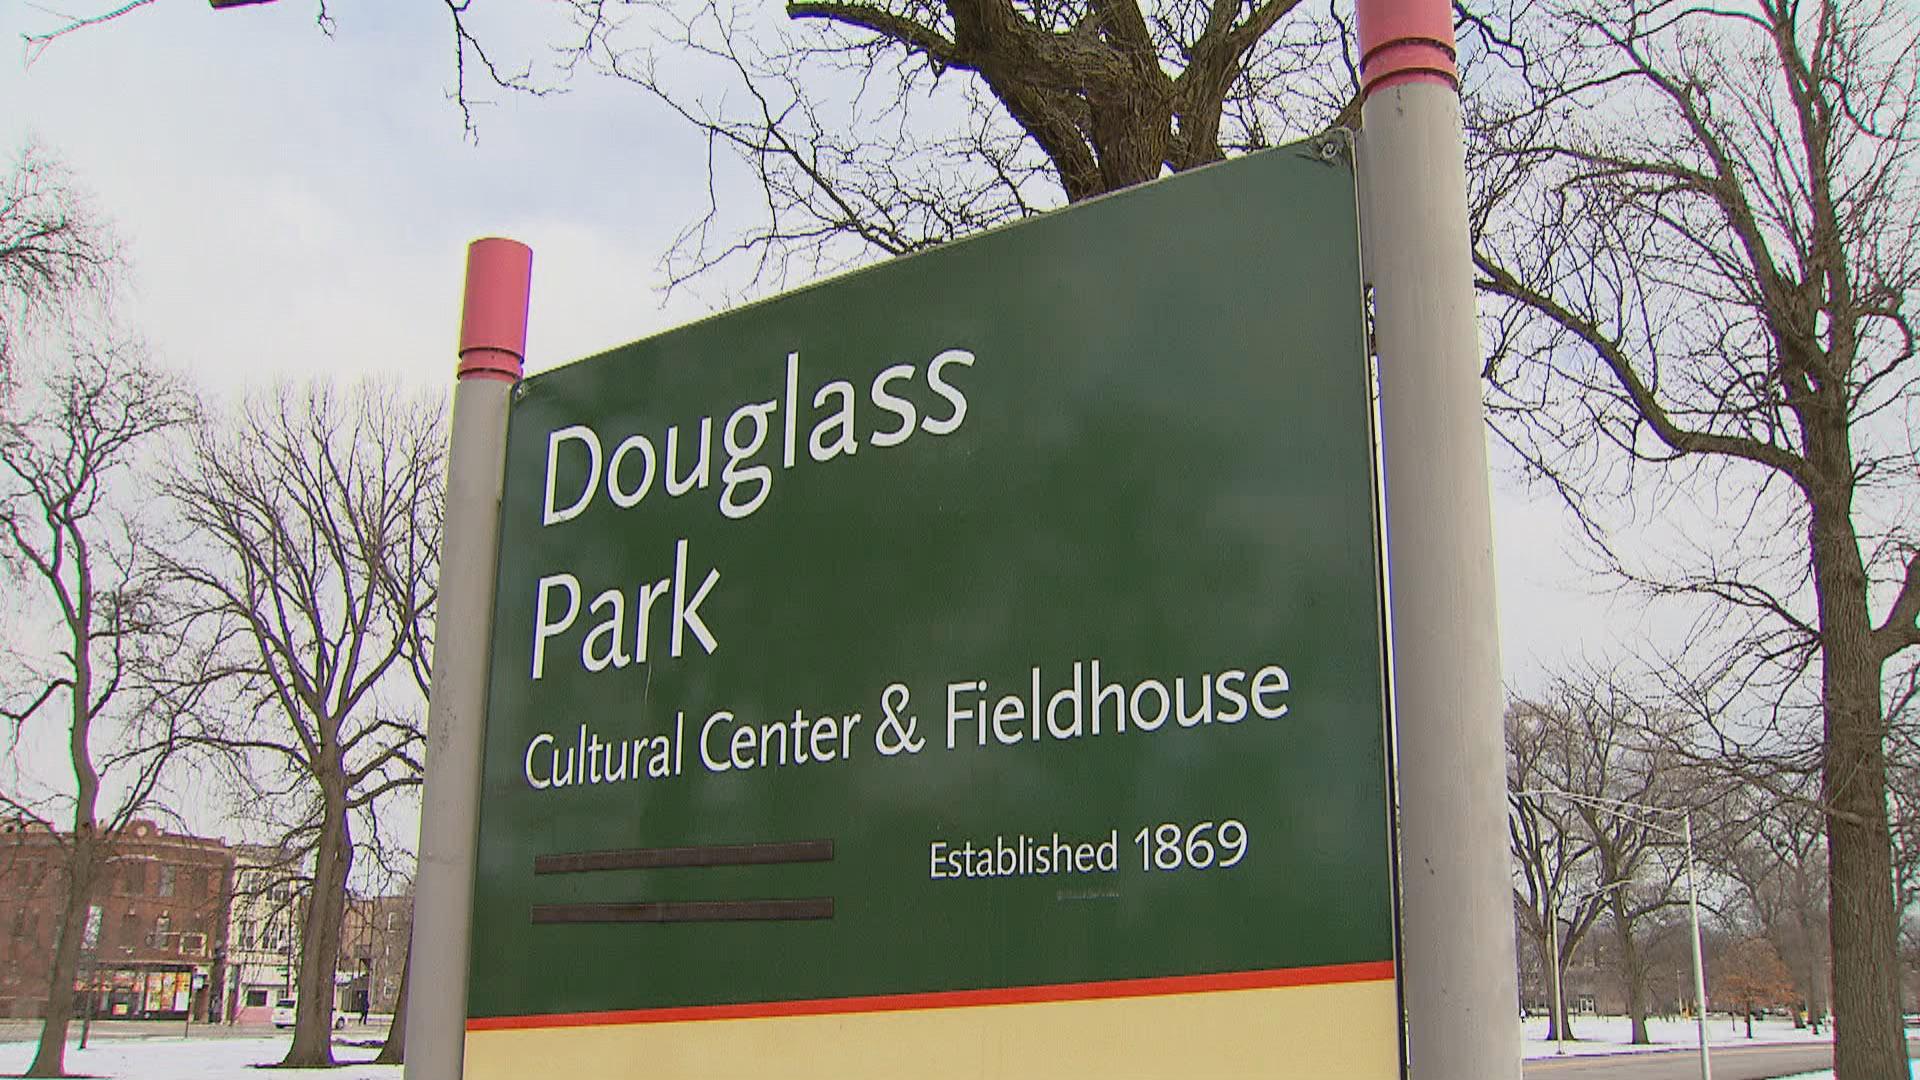 Someone took matters into their own hands and unofficially changed the name of Douglas Park on signage earlier in 2020. (WTTW News) 